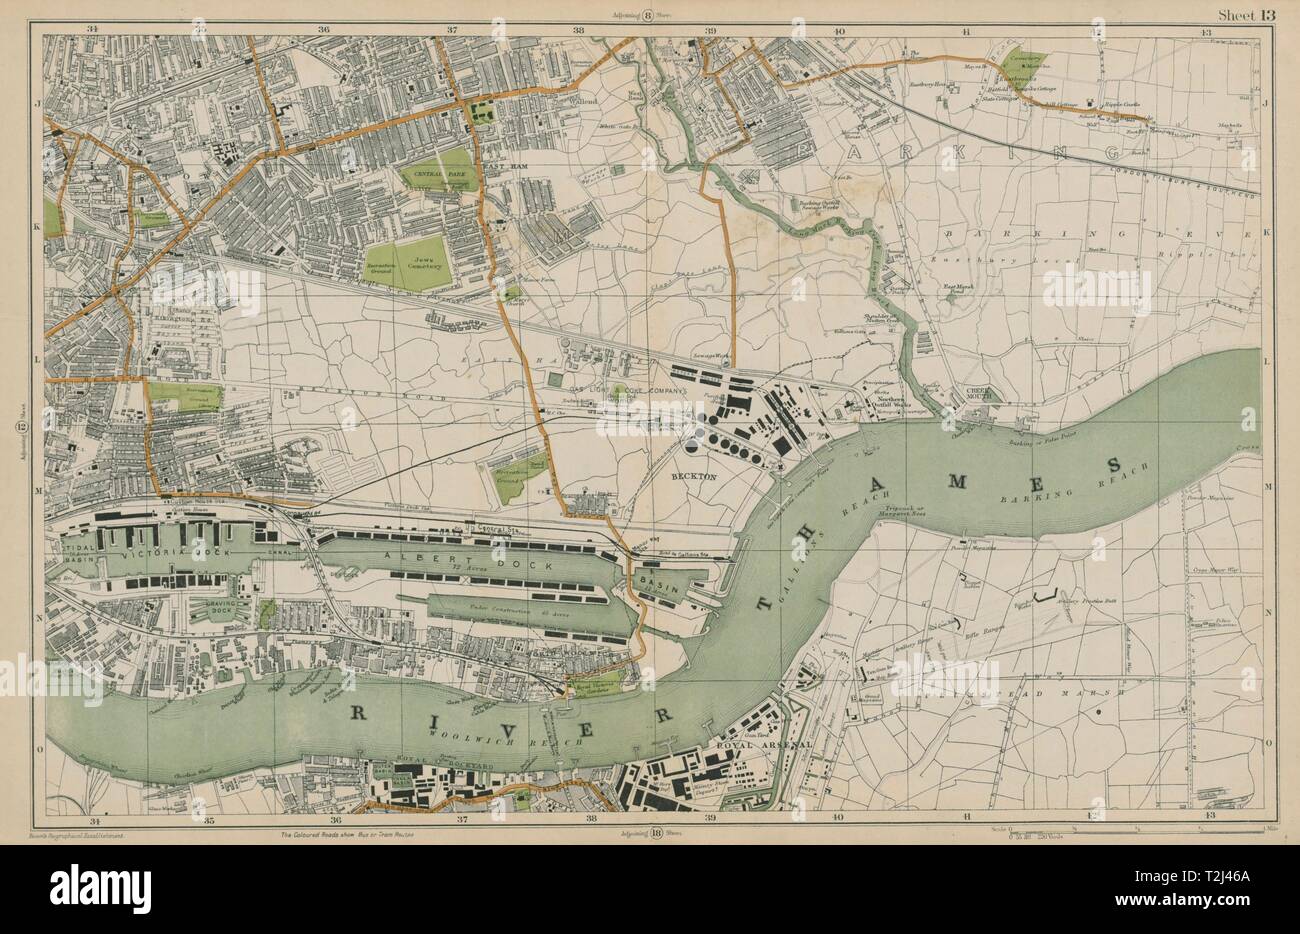 Ovest/Est prosciutto & BARKING Plaistow Woolwich Thamesmead Beckton. BACON 1919 mappa Foto Stock